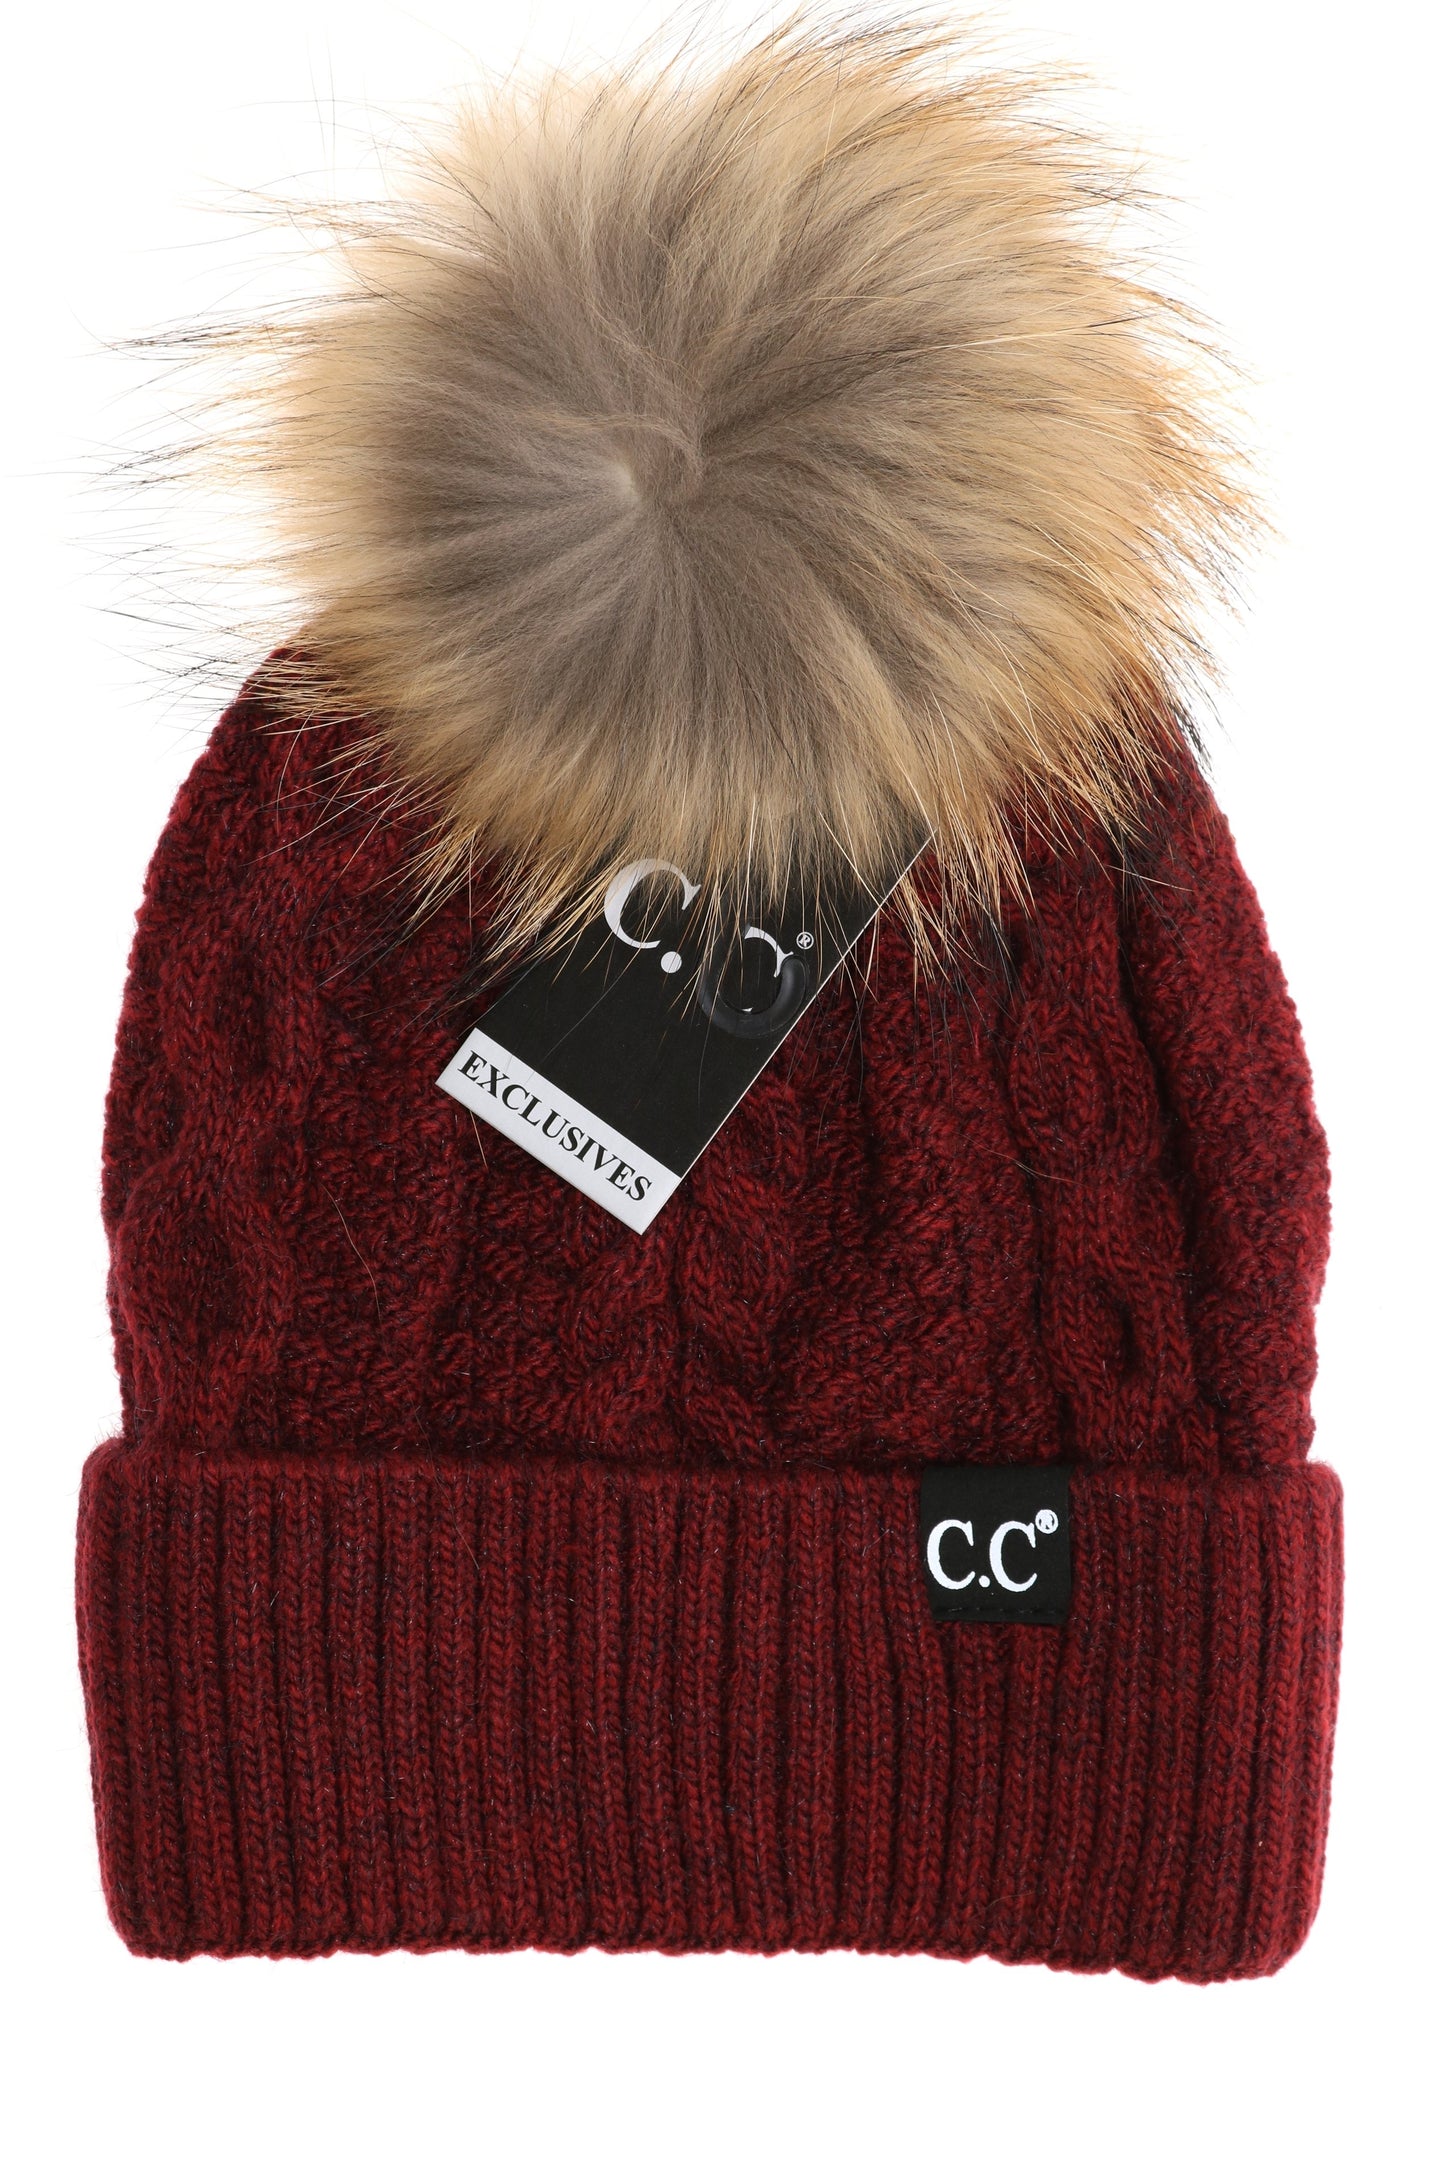 C.C Exclusive-Black Label Special Edition Ribbed Cuff Fur Pom Beanie- MULTIPLE COLORS